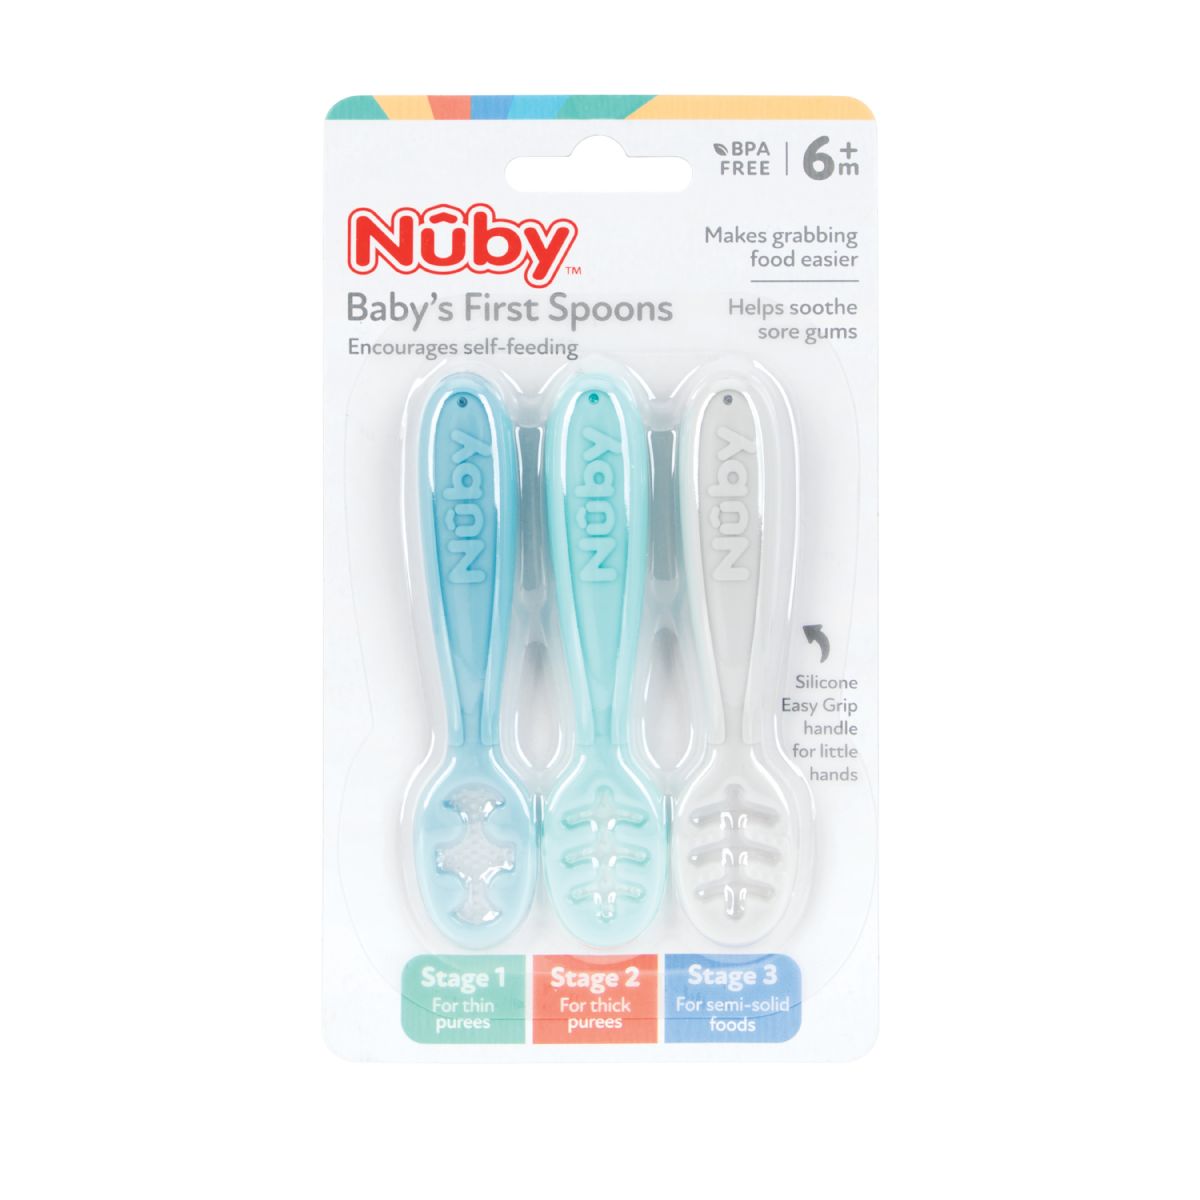 24 pieces Nuby 3-Stage Silicone Baby's First Spoons - Baby Utensils - at 